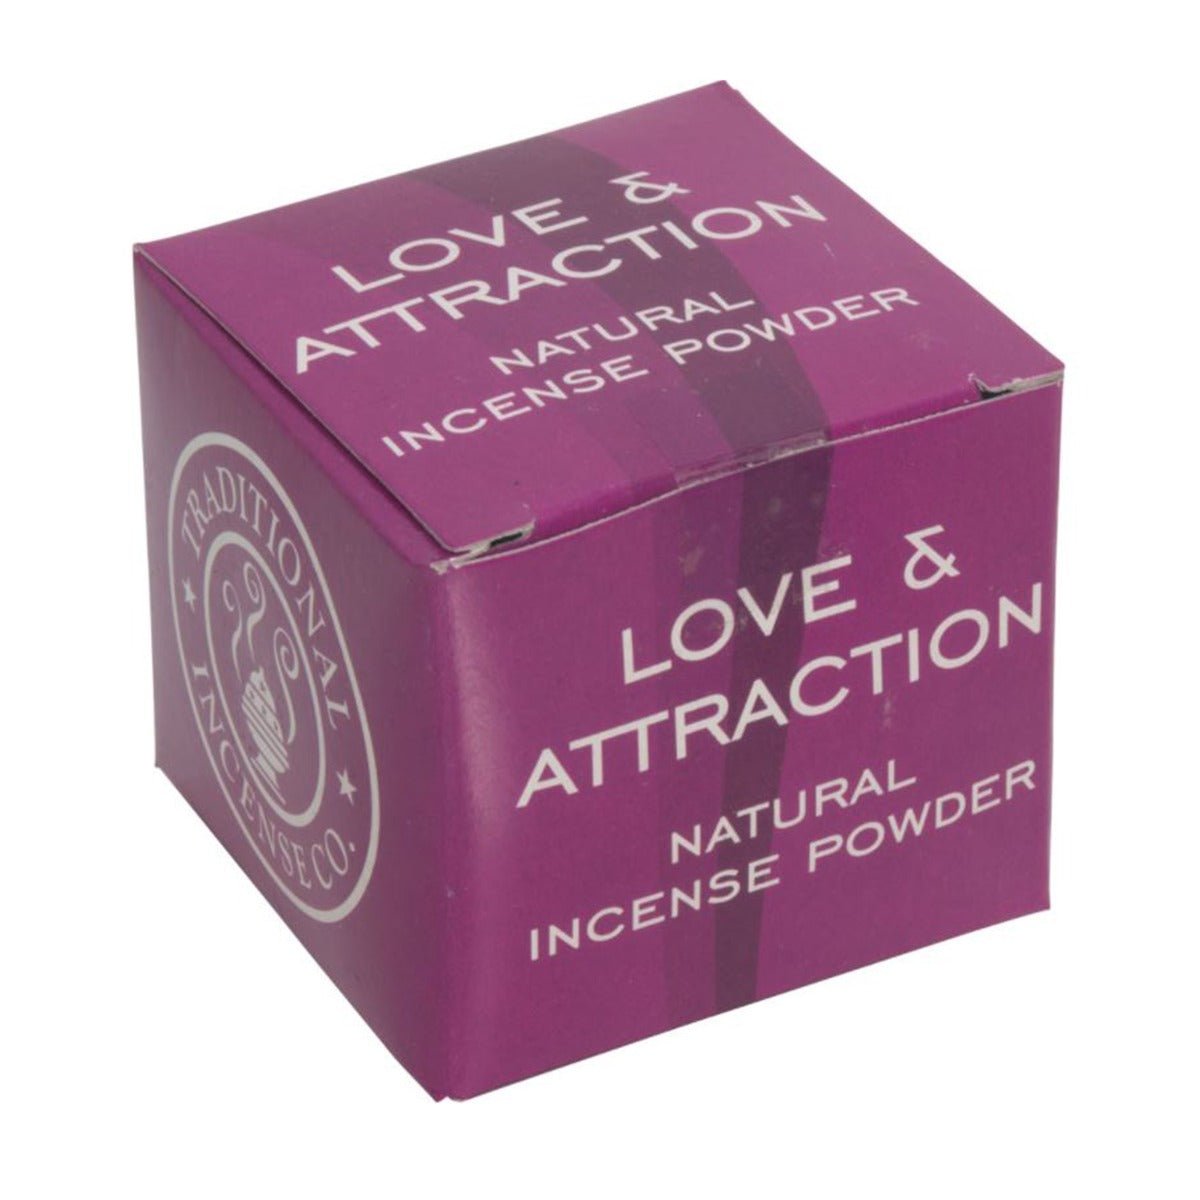 Love and Attraction Powder Incense - 13 Moons